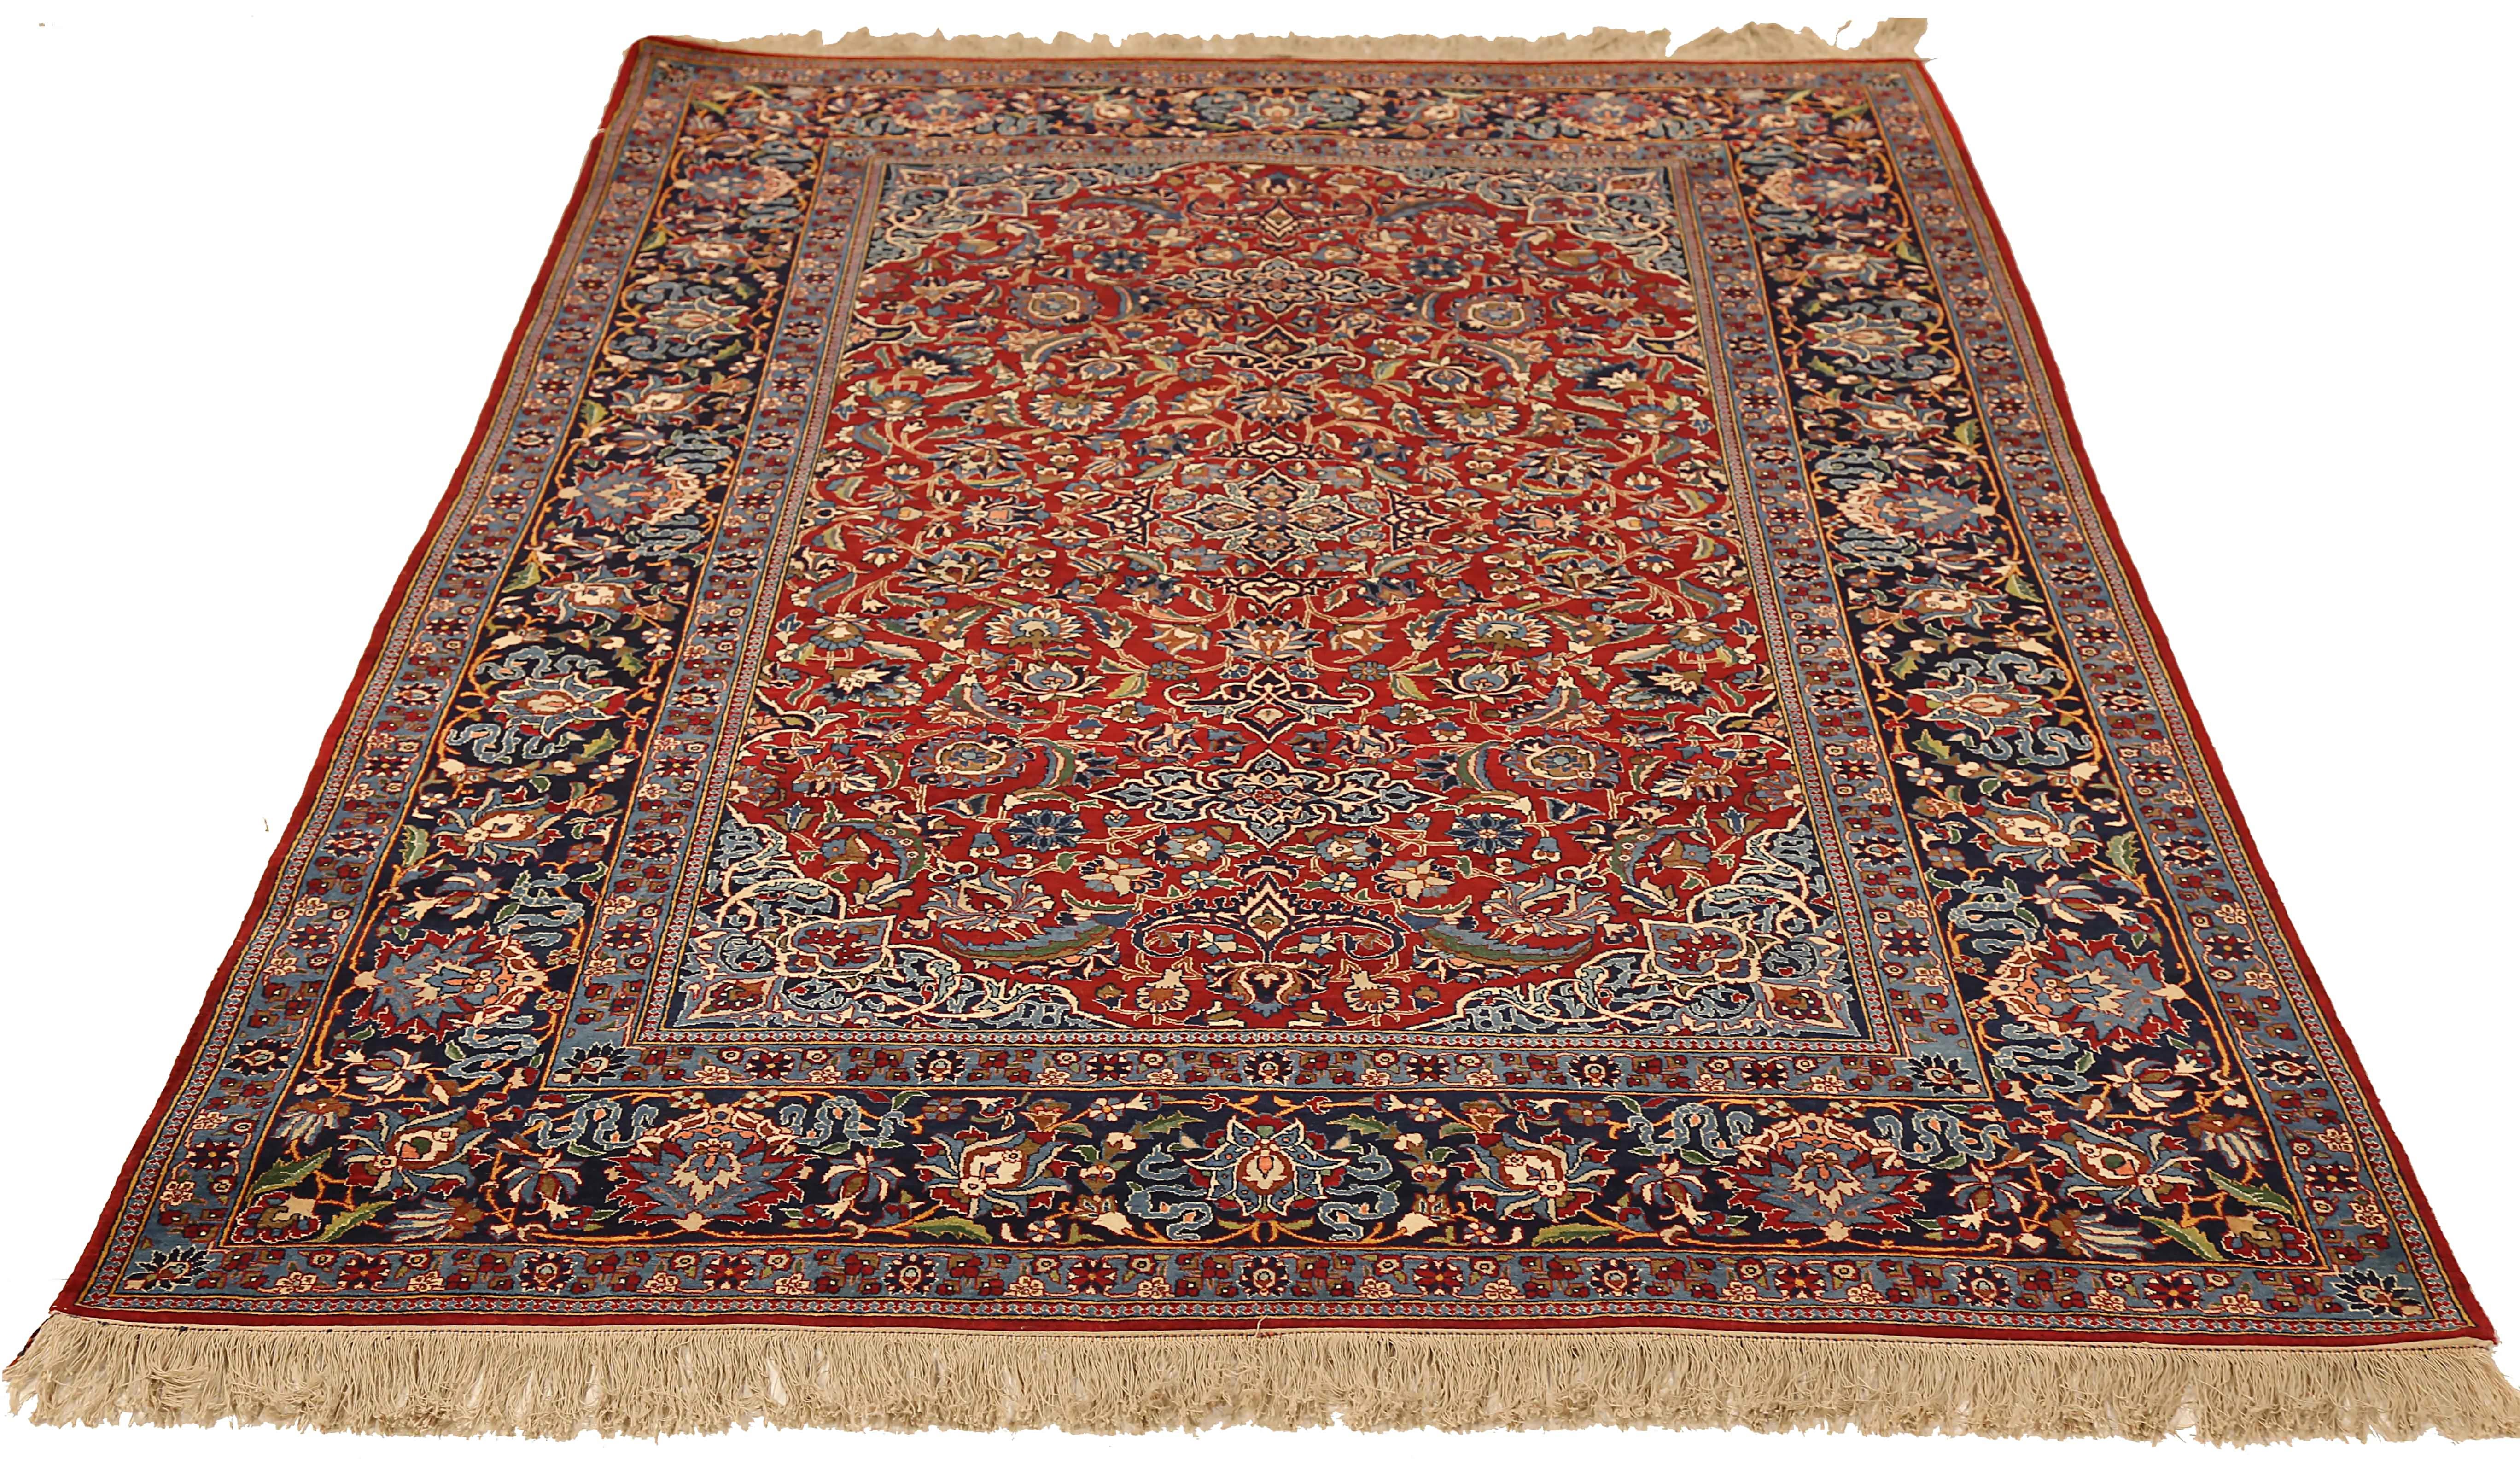 Rare antique Russian pair rug handwoven from the finest sheep’s wool. It’s colored with all-natural vegetable dyes that are safe for humans and pets. It’s a traditional Naien design handwoven by expert artisans. It’s a lovely area rug that can be